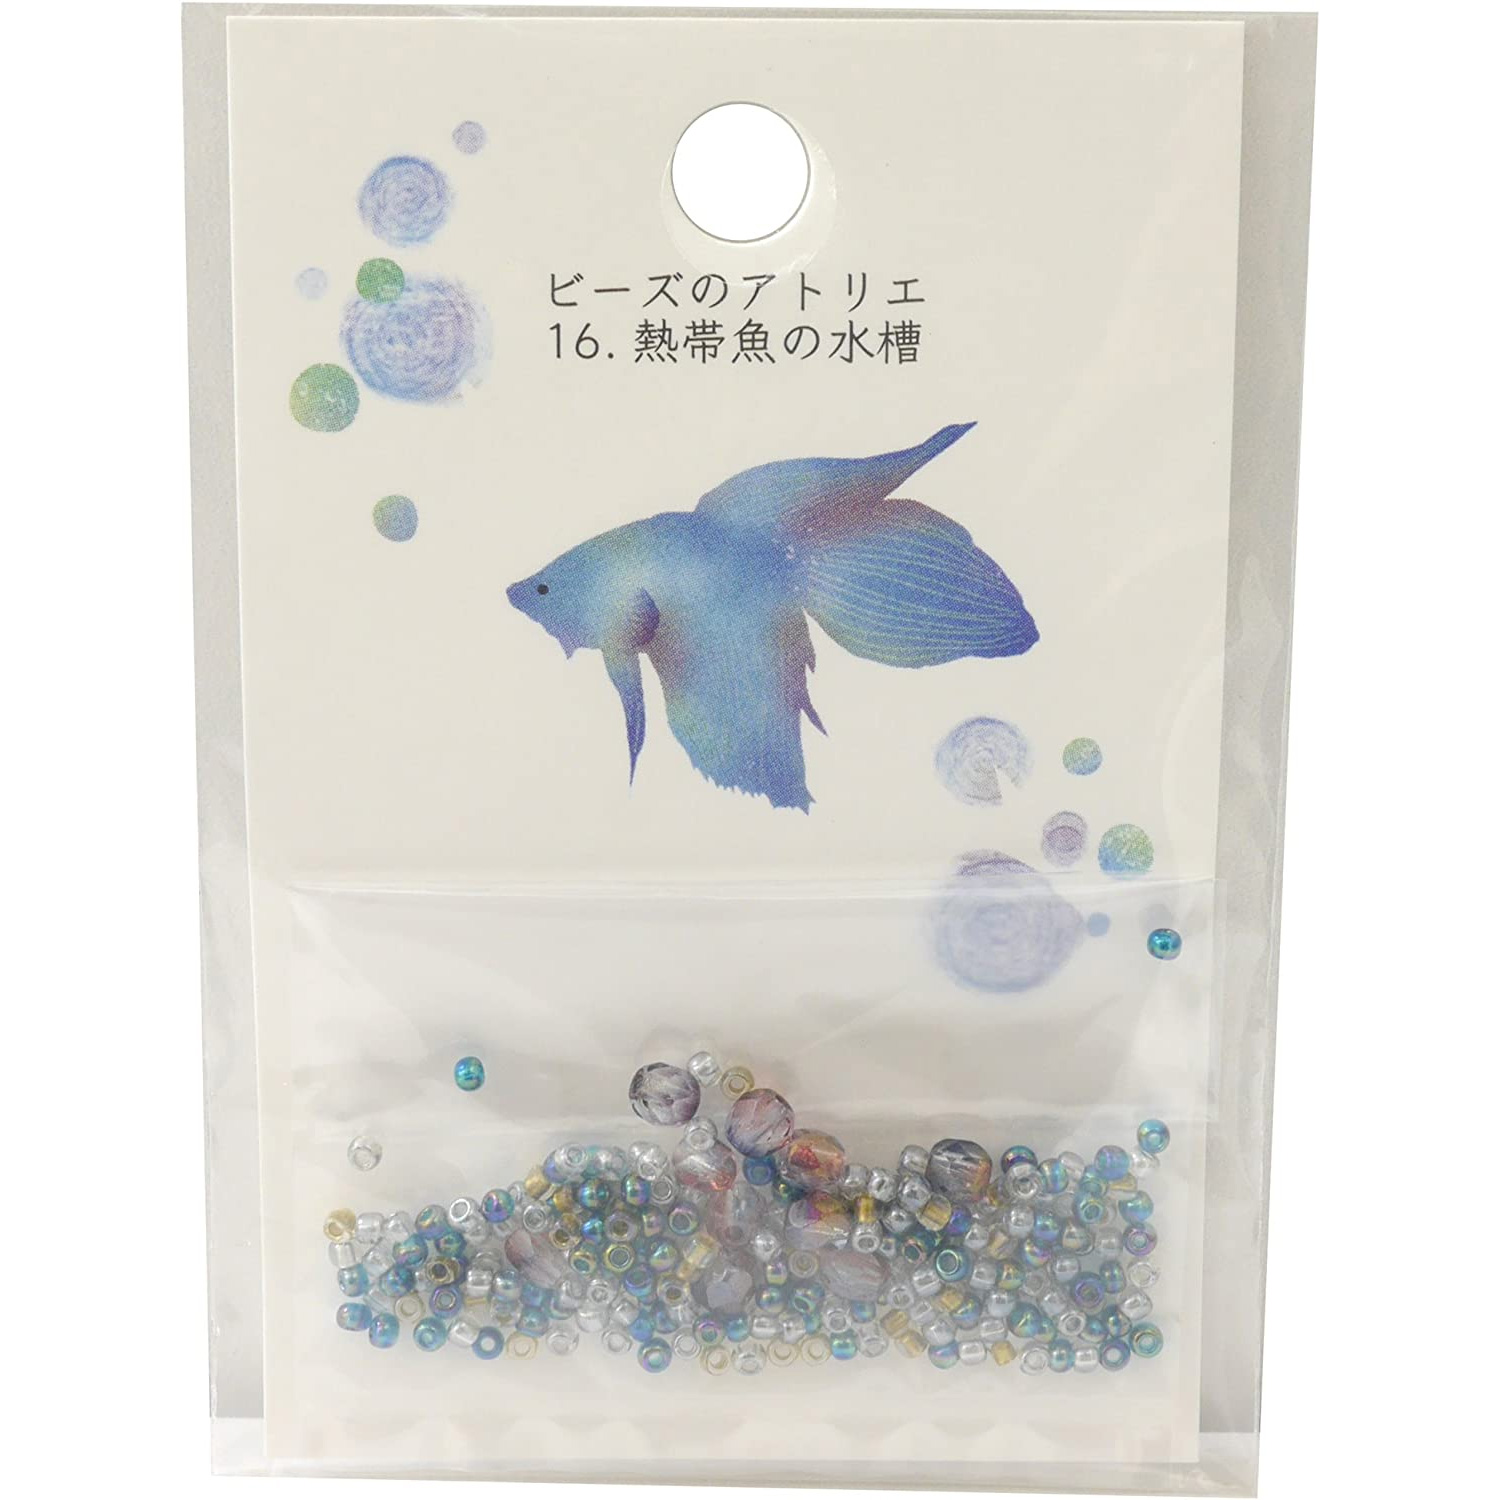 [Order upon demand, not returnable]■TOH398535 ビーズパック16 熱帯魚の水槽 5パック (セット)